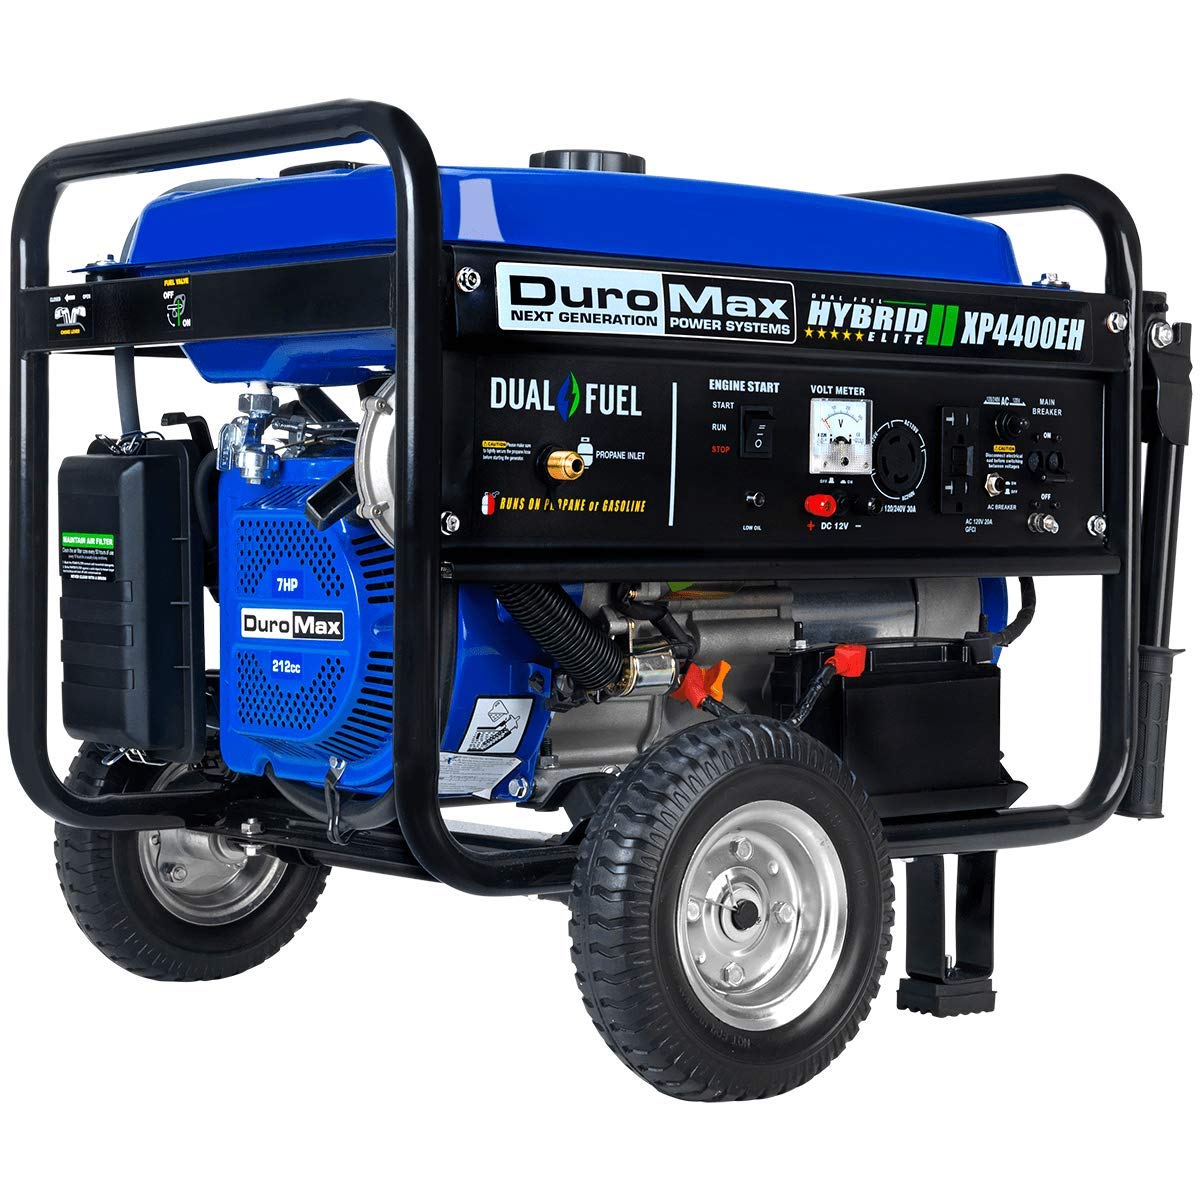 DuroMax XP4400EH Dual Fuel Portable Generator - $320 after 20% Coupon